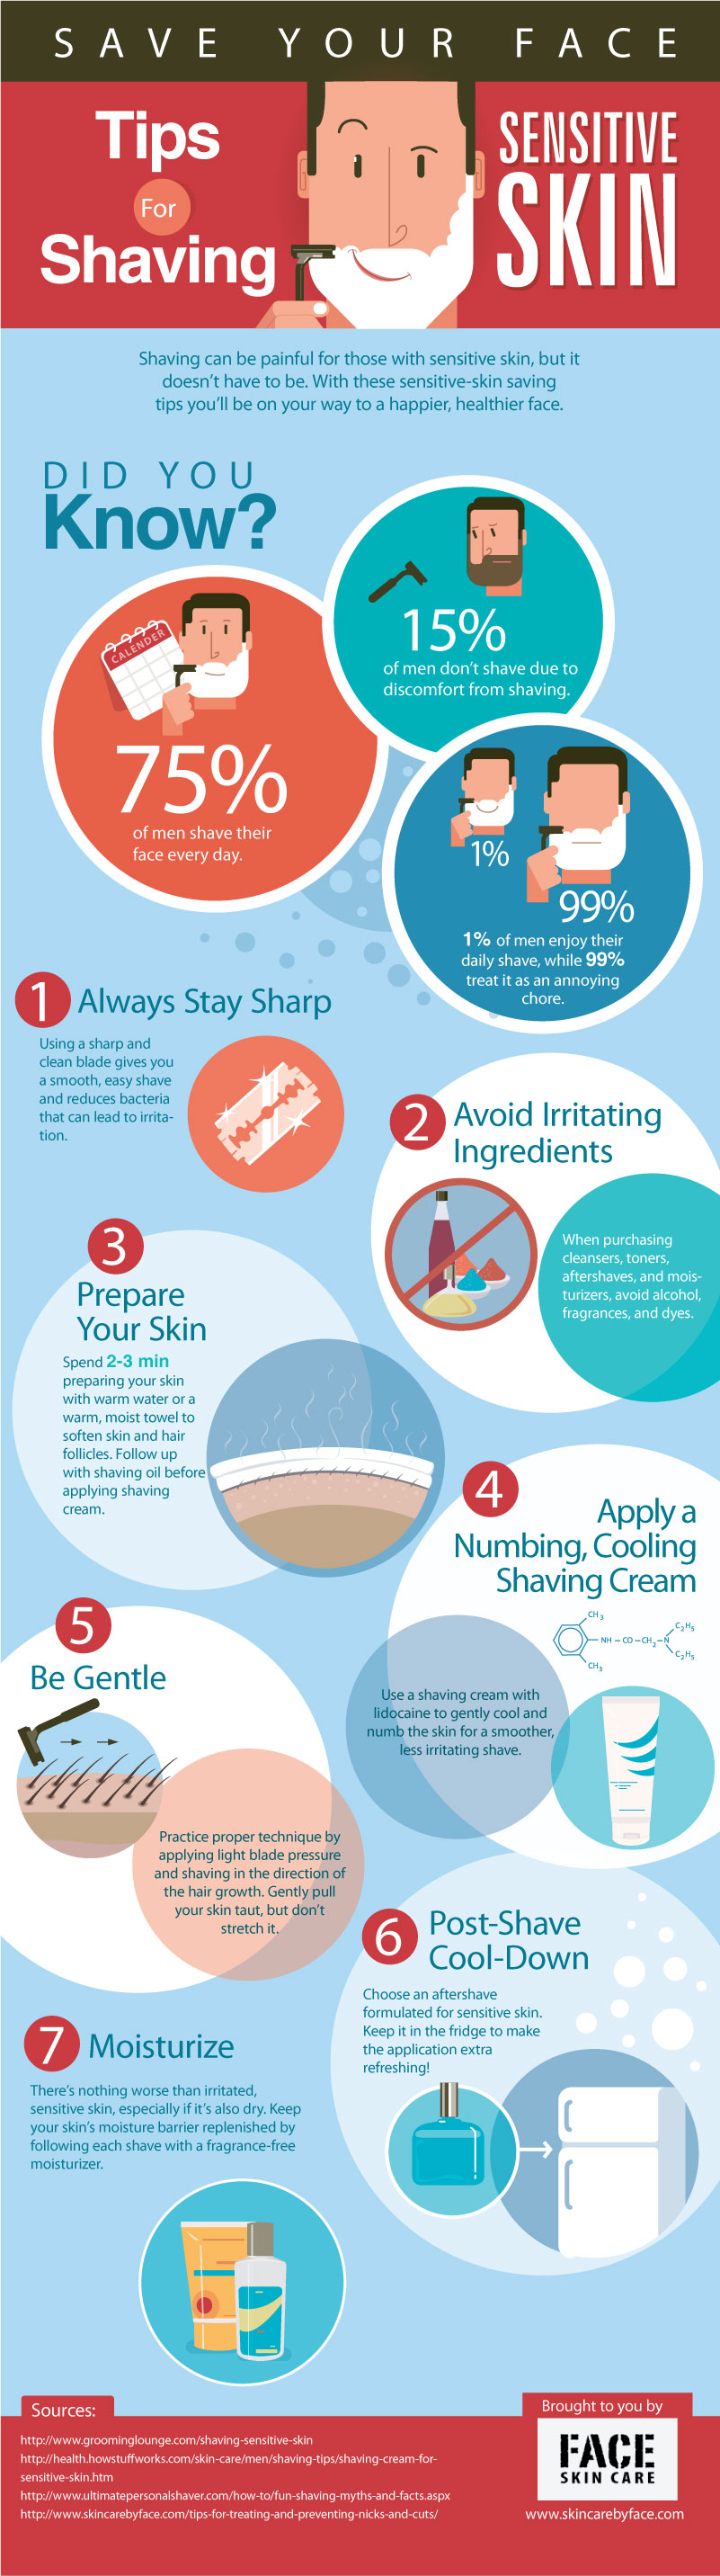 Infographic showing tips for shaving with sensitive skin